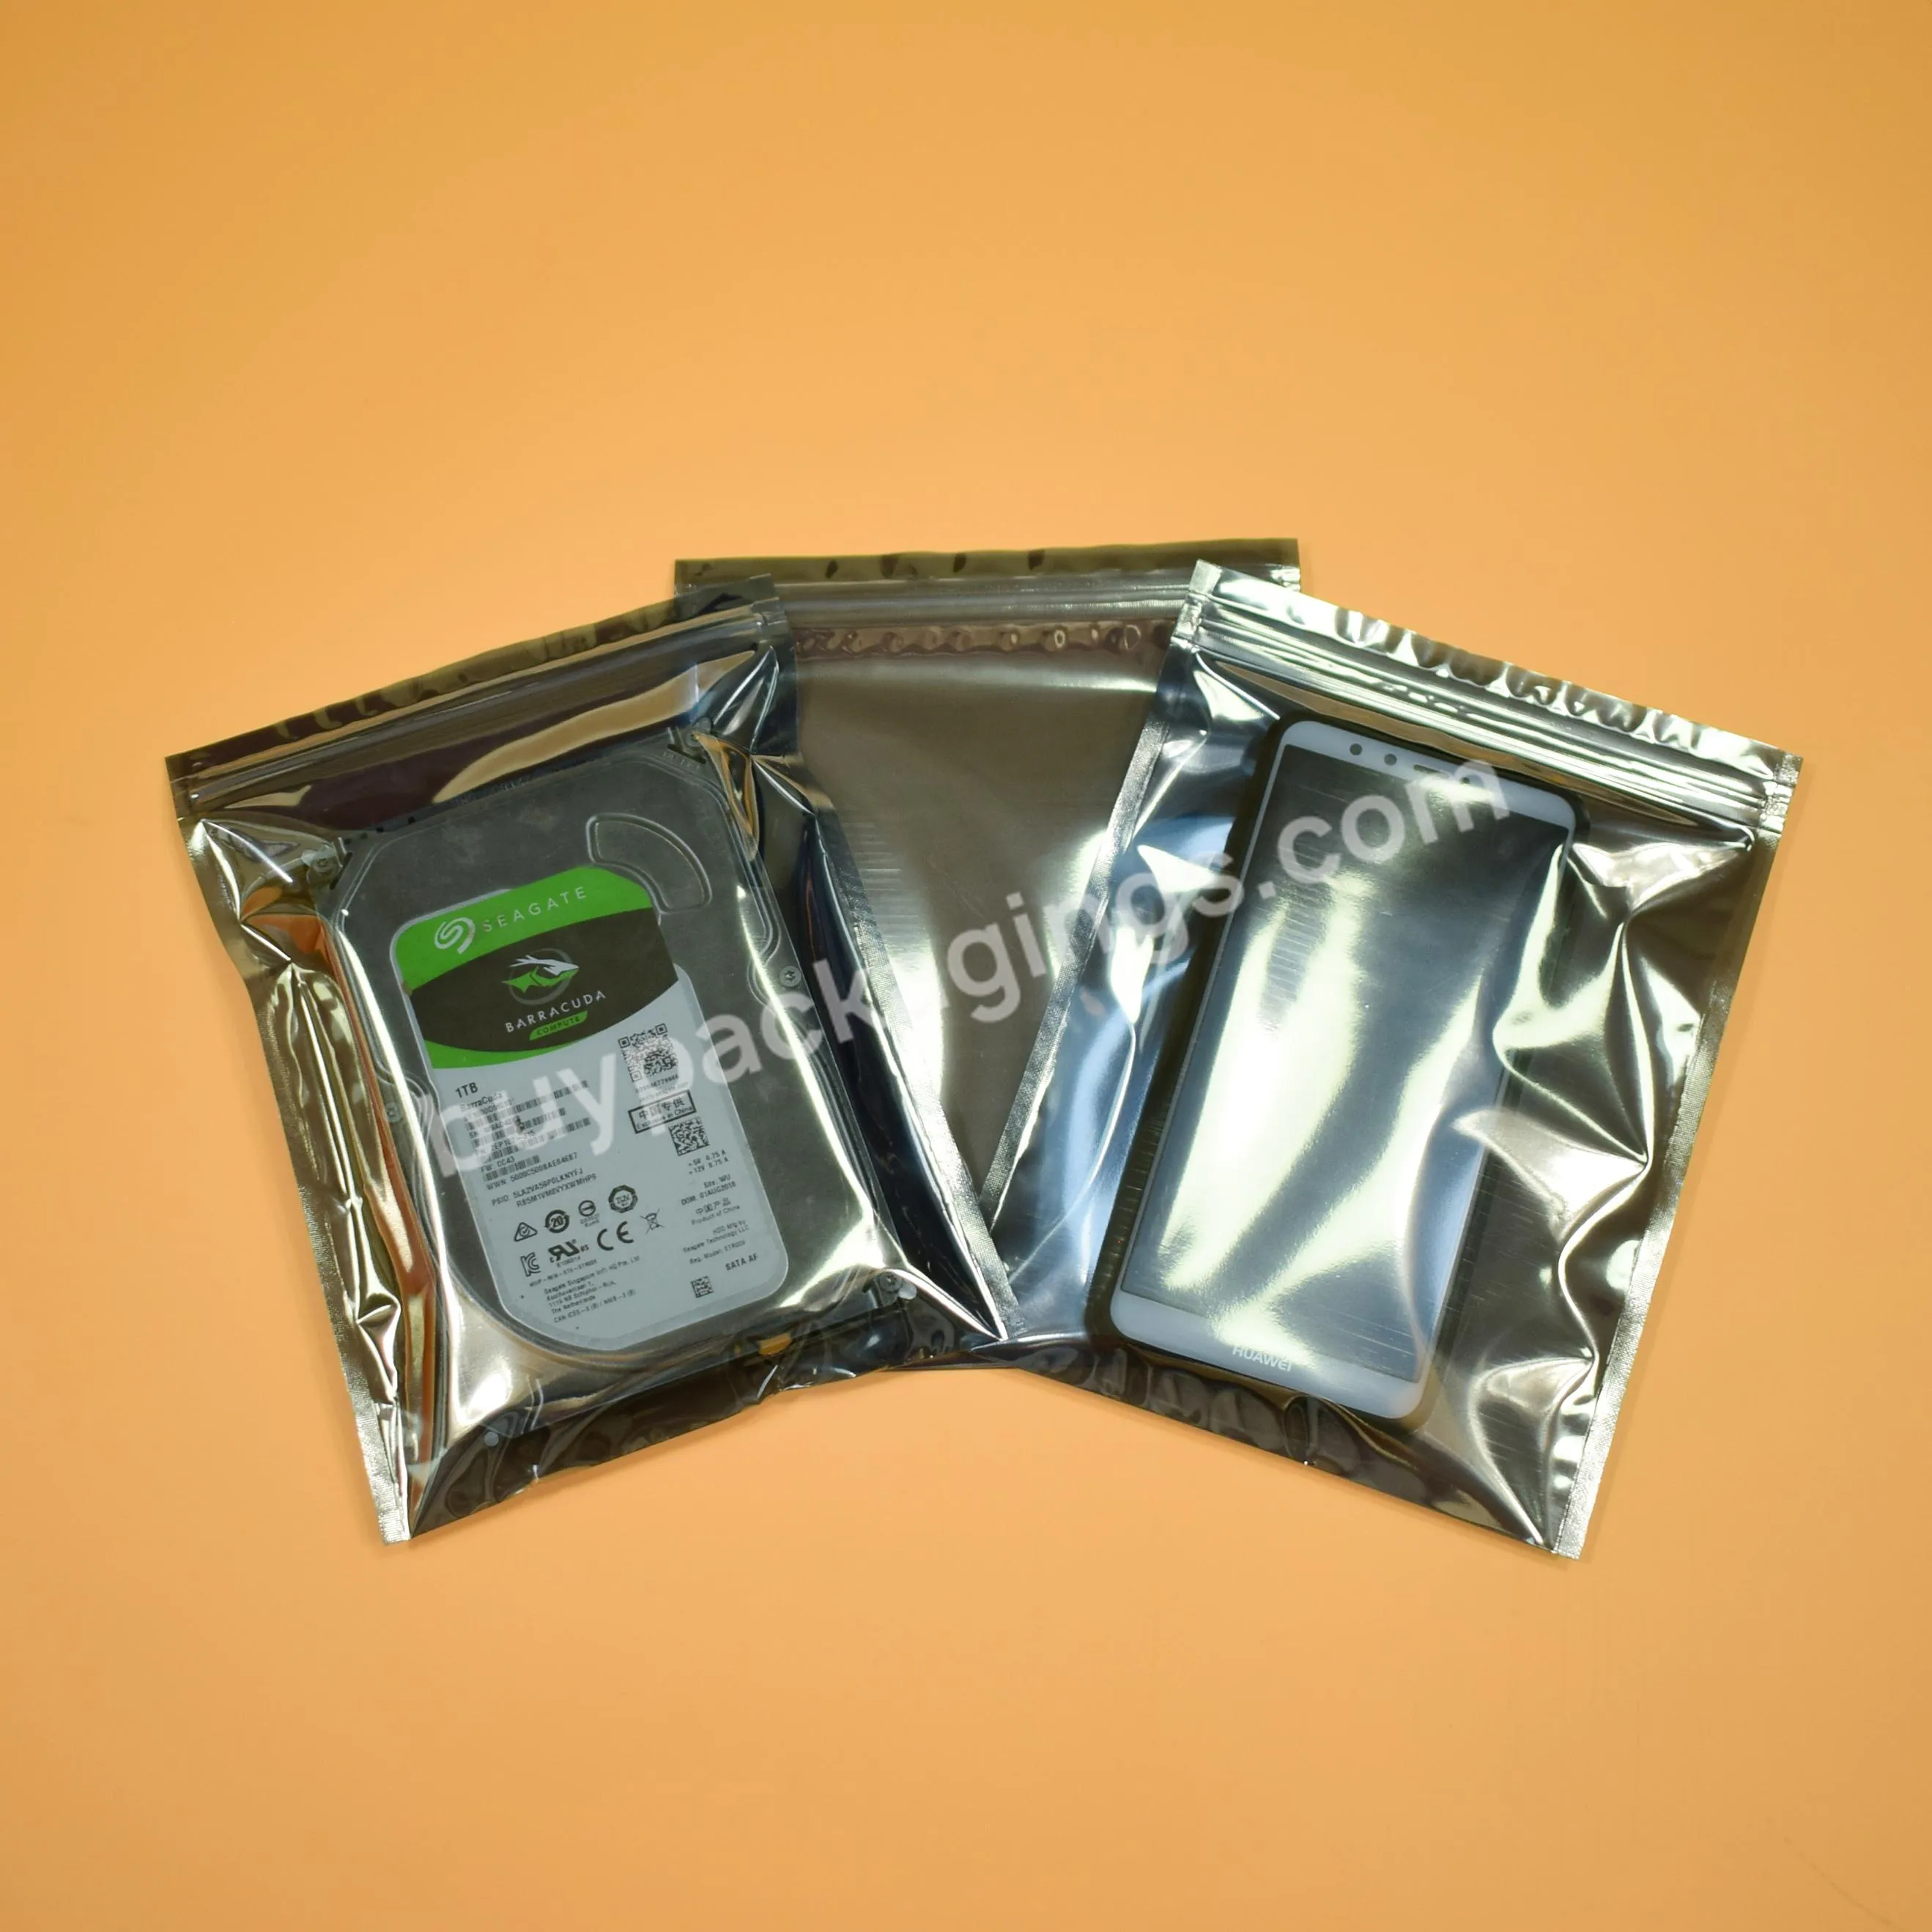 Anti-static Shielding Bags Recyclable Esd Bags Anti-static Plastic Esd Shielding Bag For Electronic Parts - Buy Anti-static Shielding Bags,Recyclable Esd Bags Anti-static Plastic,Esd Shielding Bag For Electronic Parts.